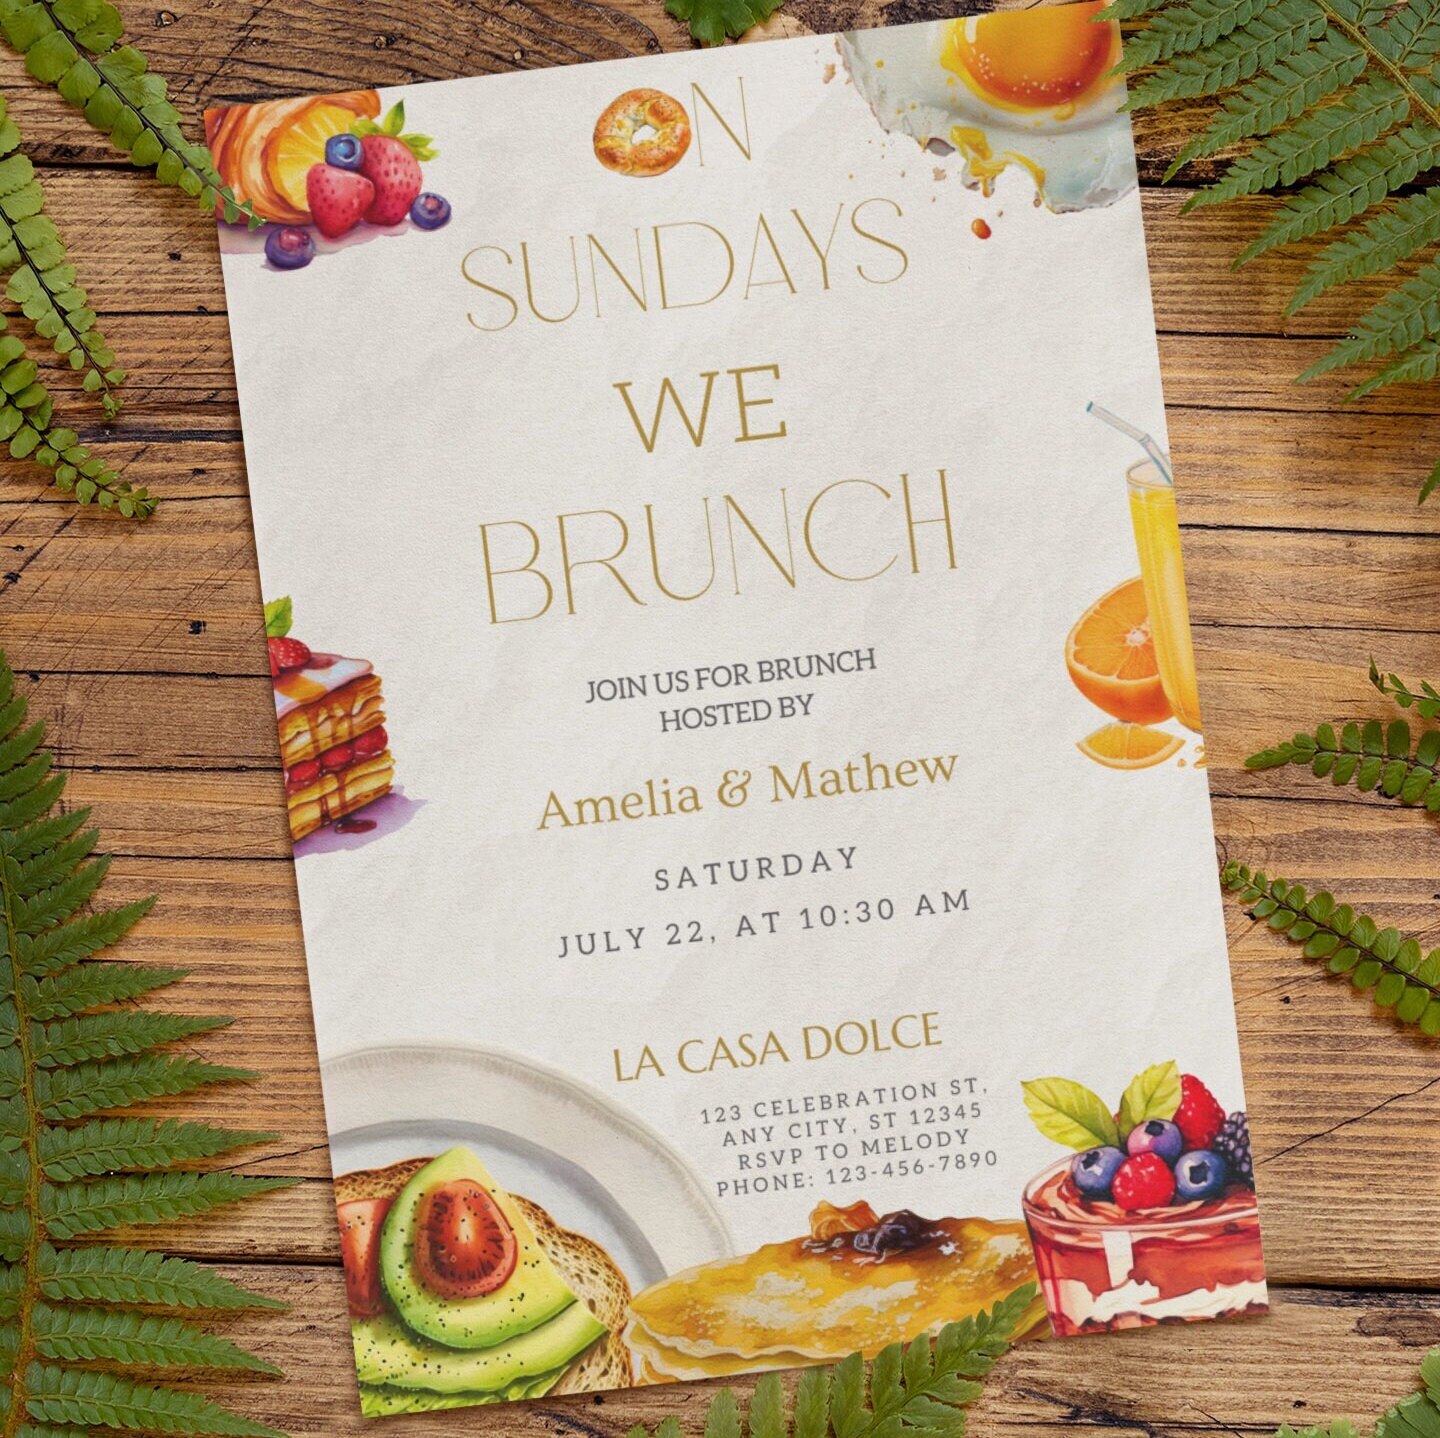 Sunday brunch just isn't complete without mimosas. Get a carafe and share  some with your friends - we're serving up cold drinks and hot…